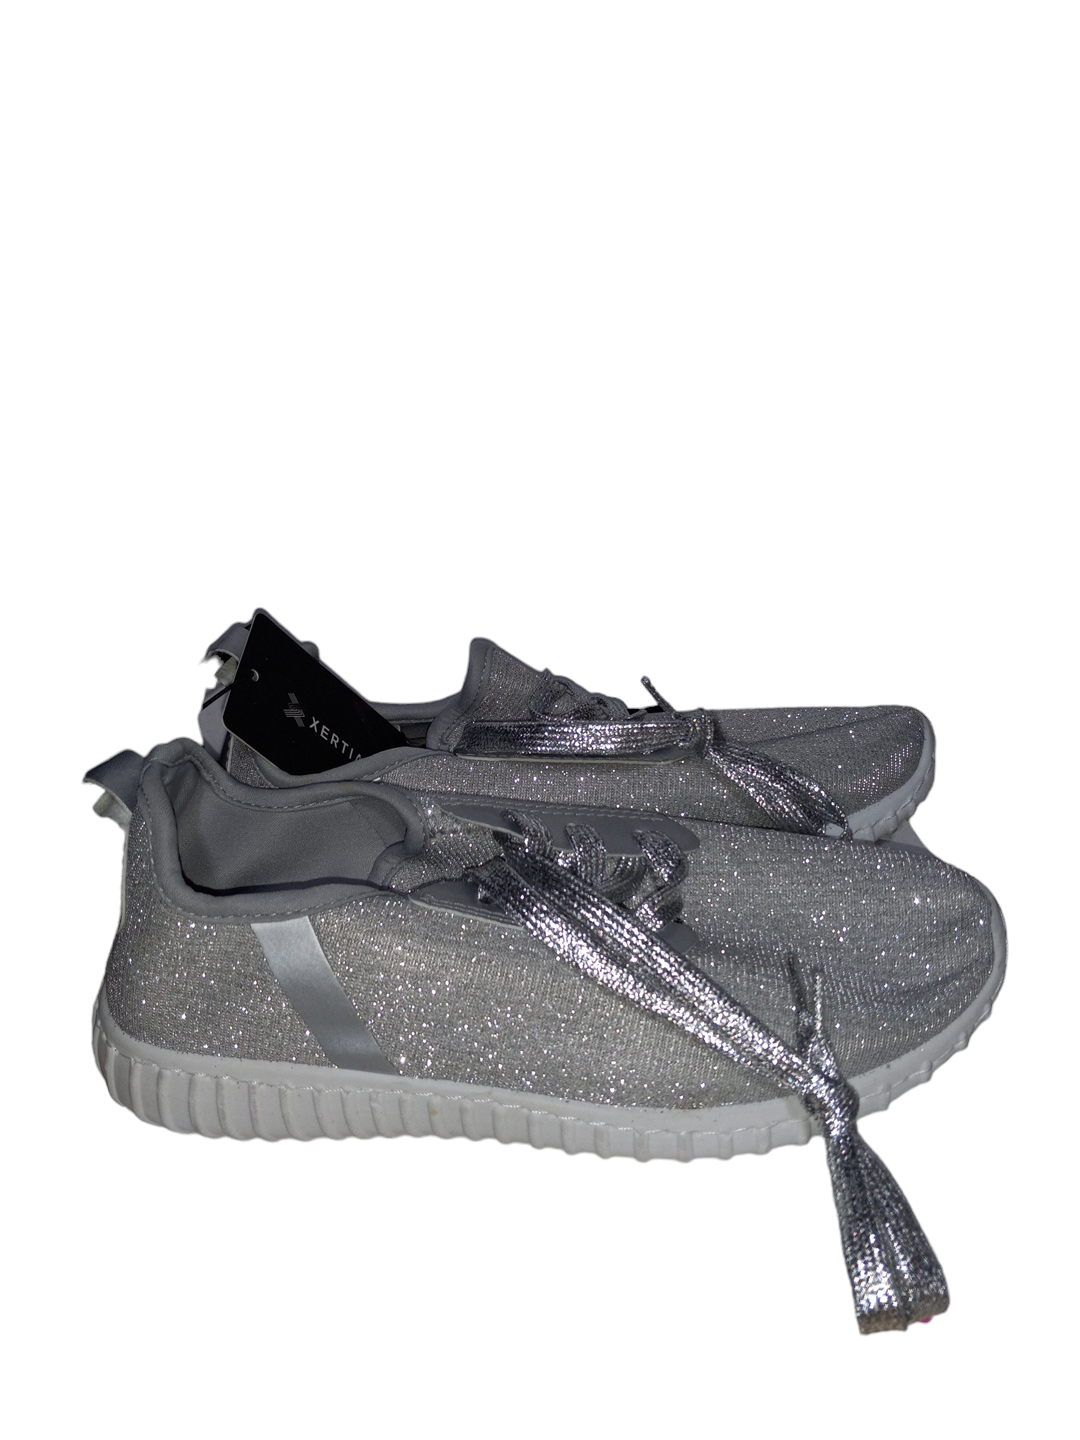 Grey Shoes Sneakers Clothes Mentor, Size 8